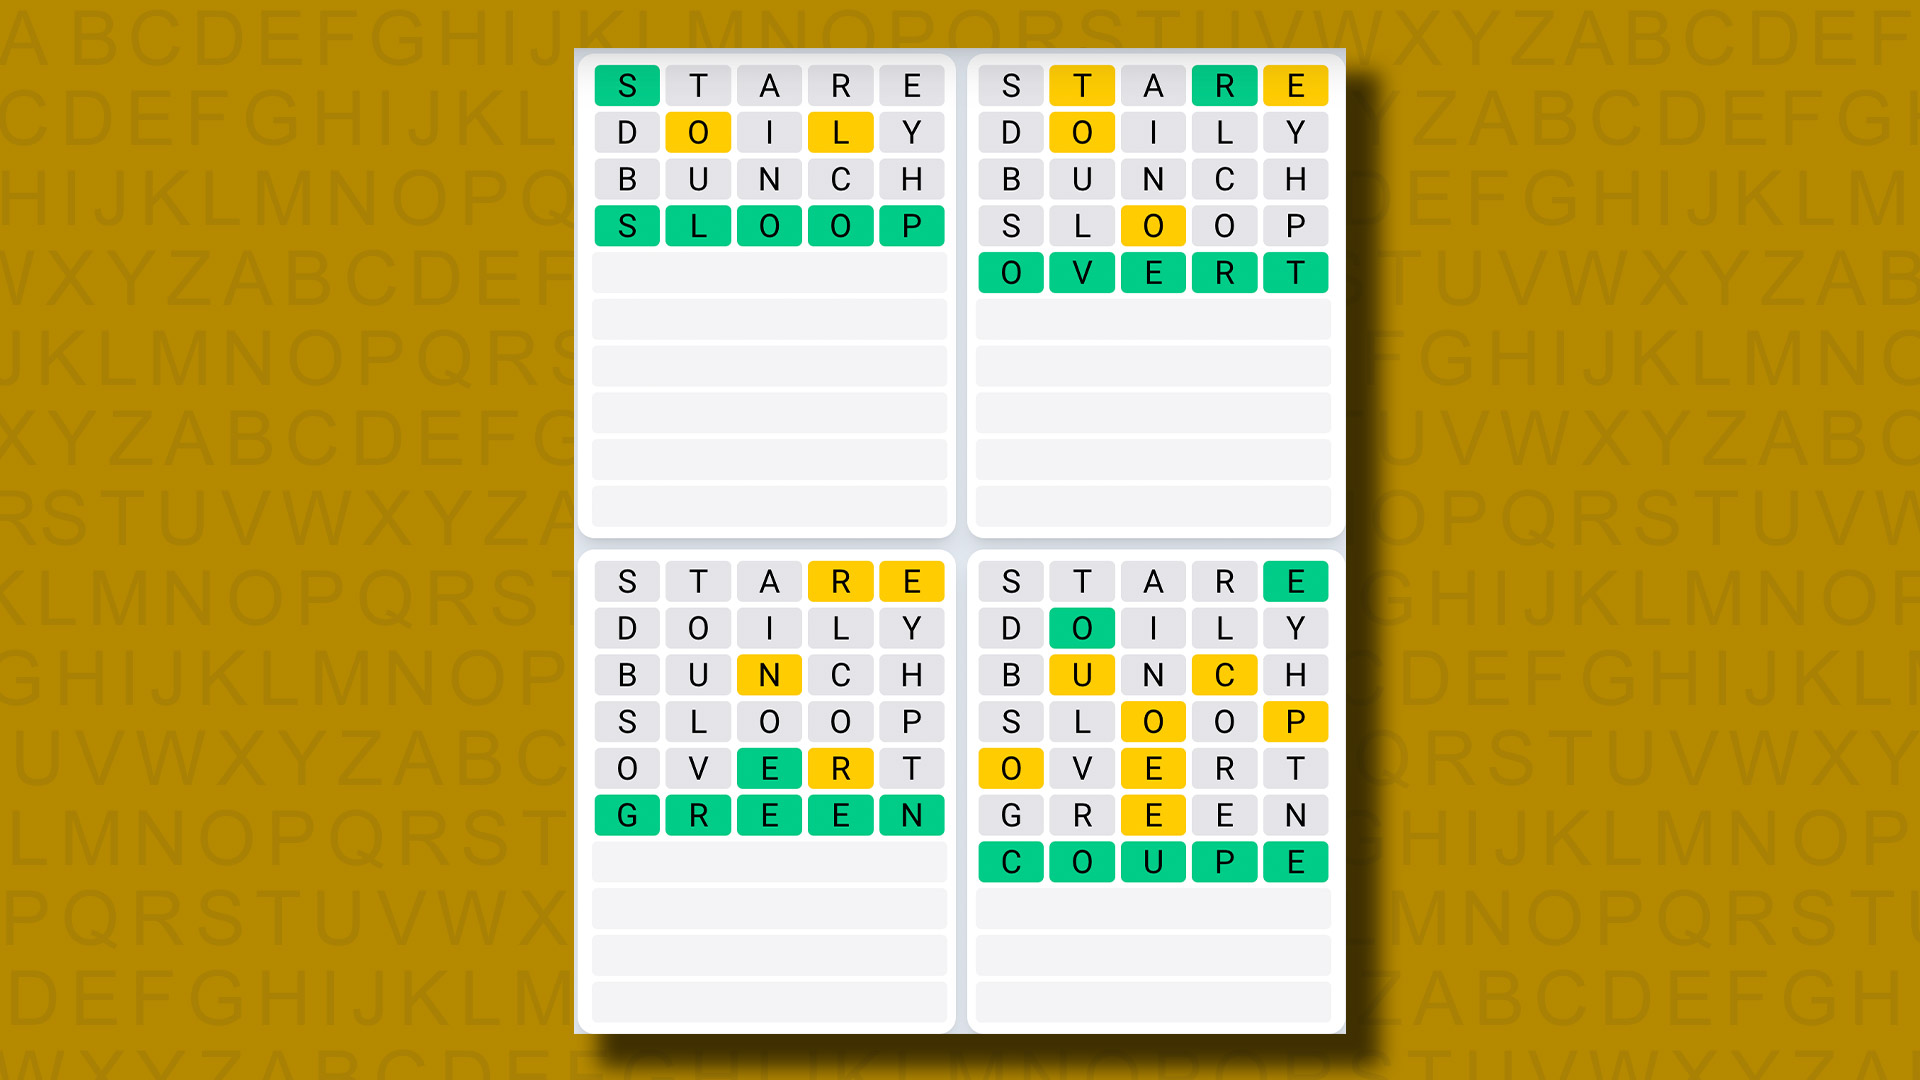 Quordle daily sequence answers for game 857 on a yellow background